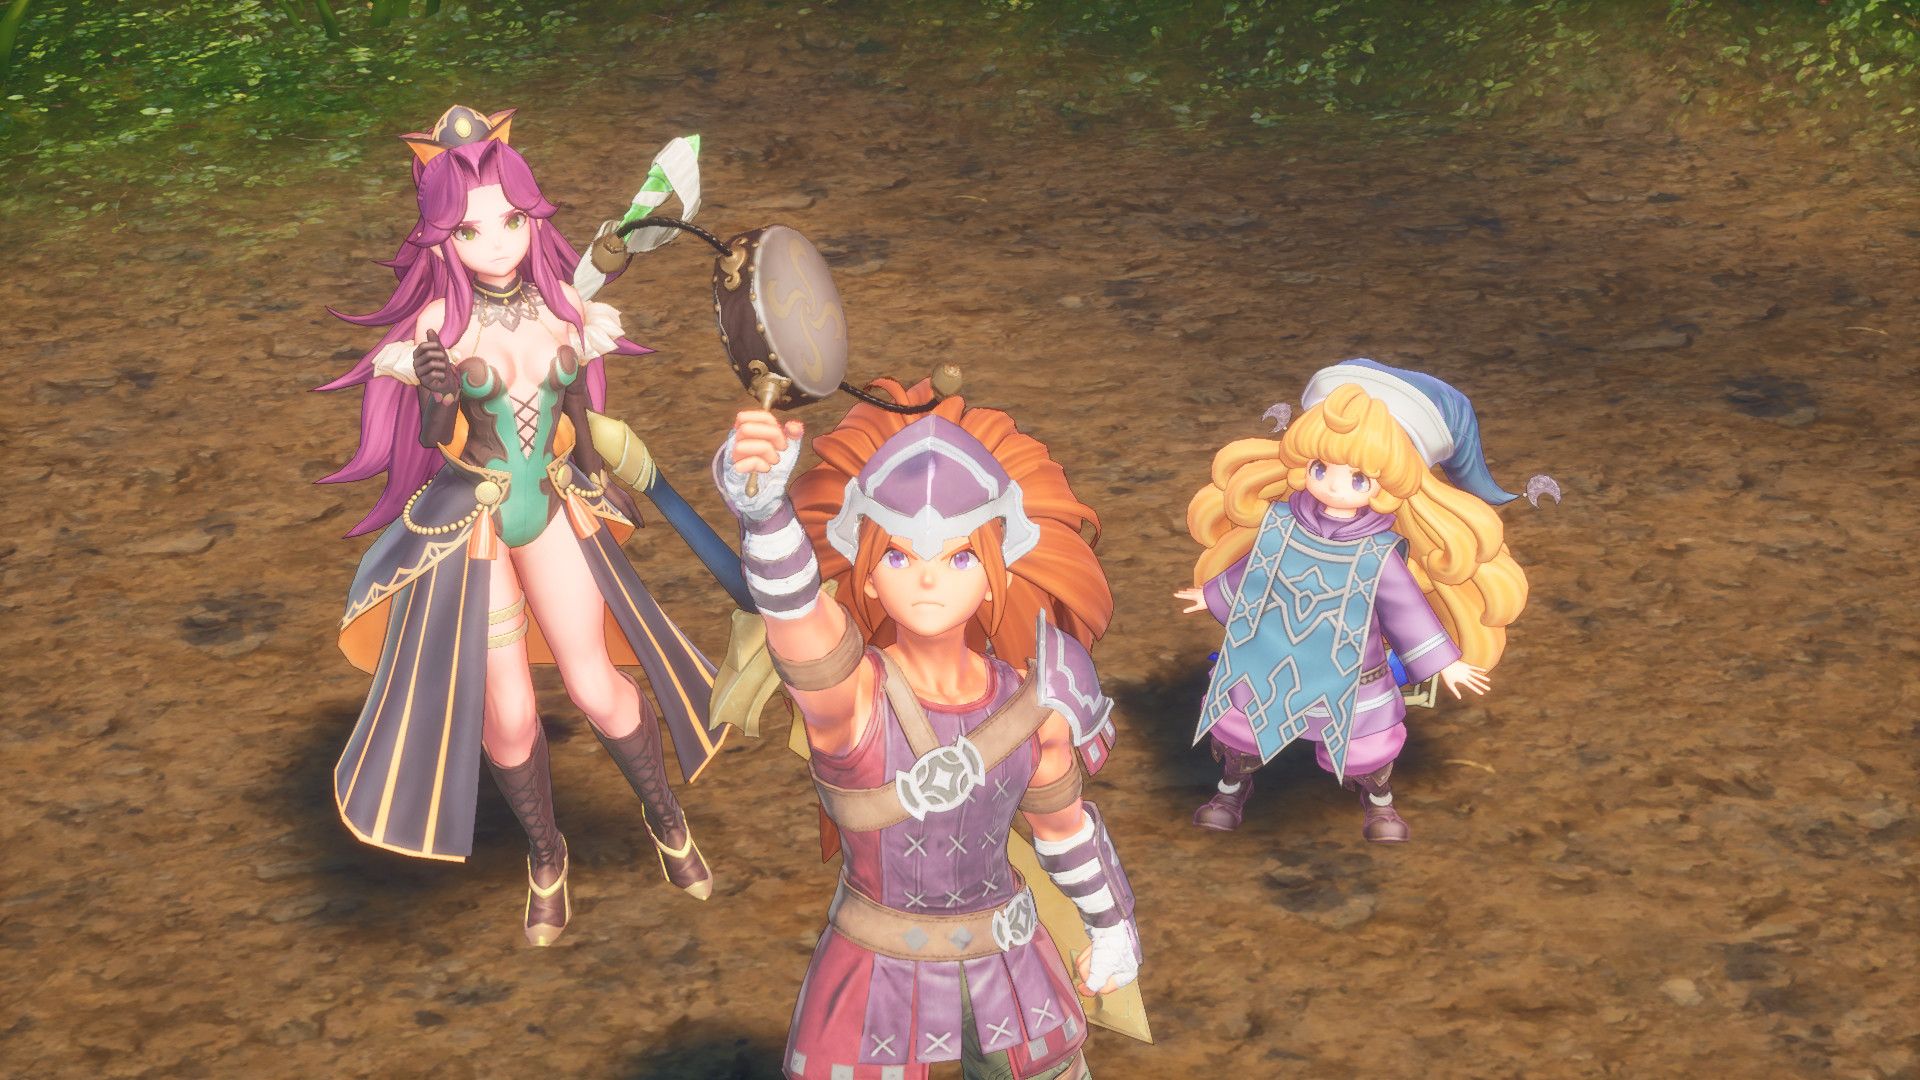 Hear 11 of the Trials of Mana Soundtrack's Songs